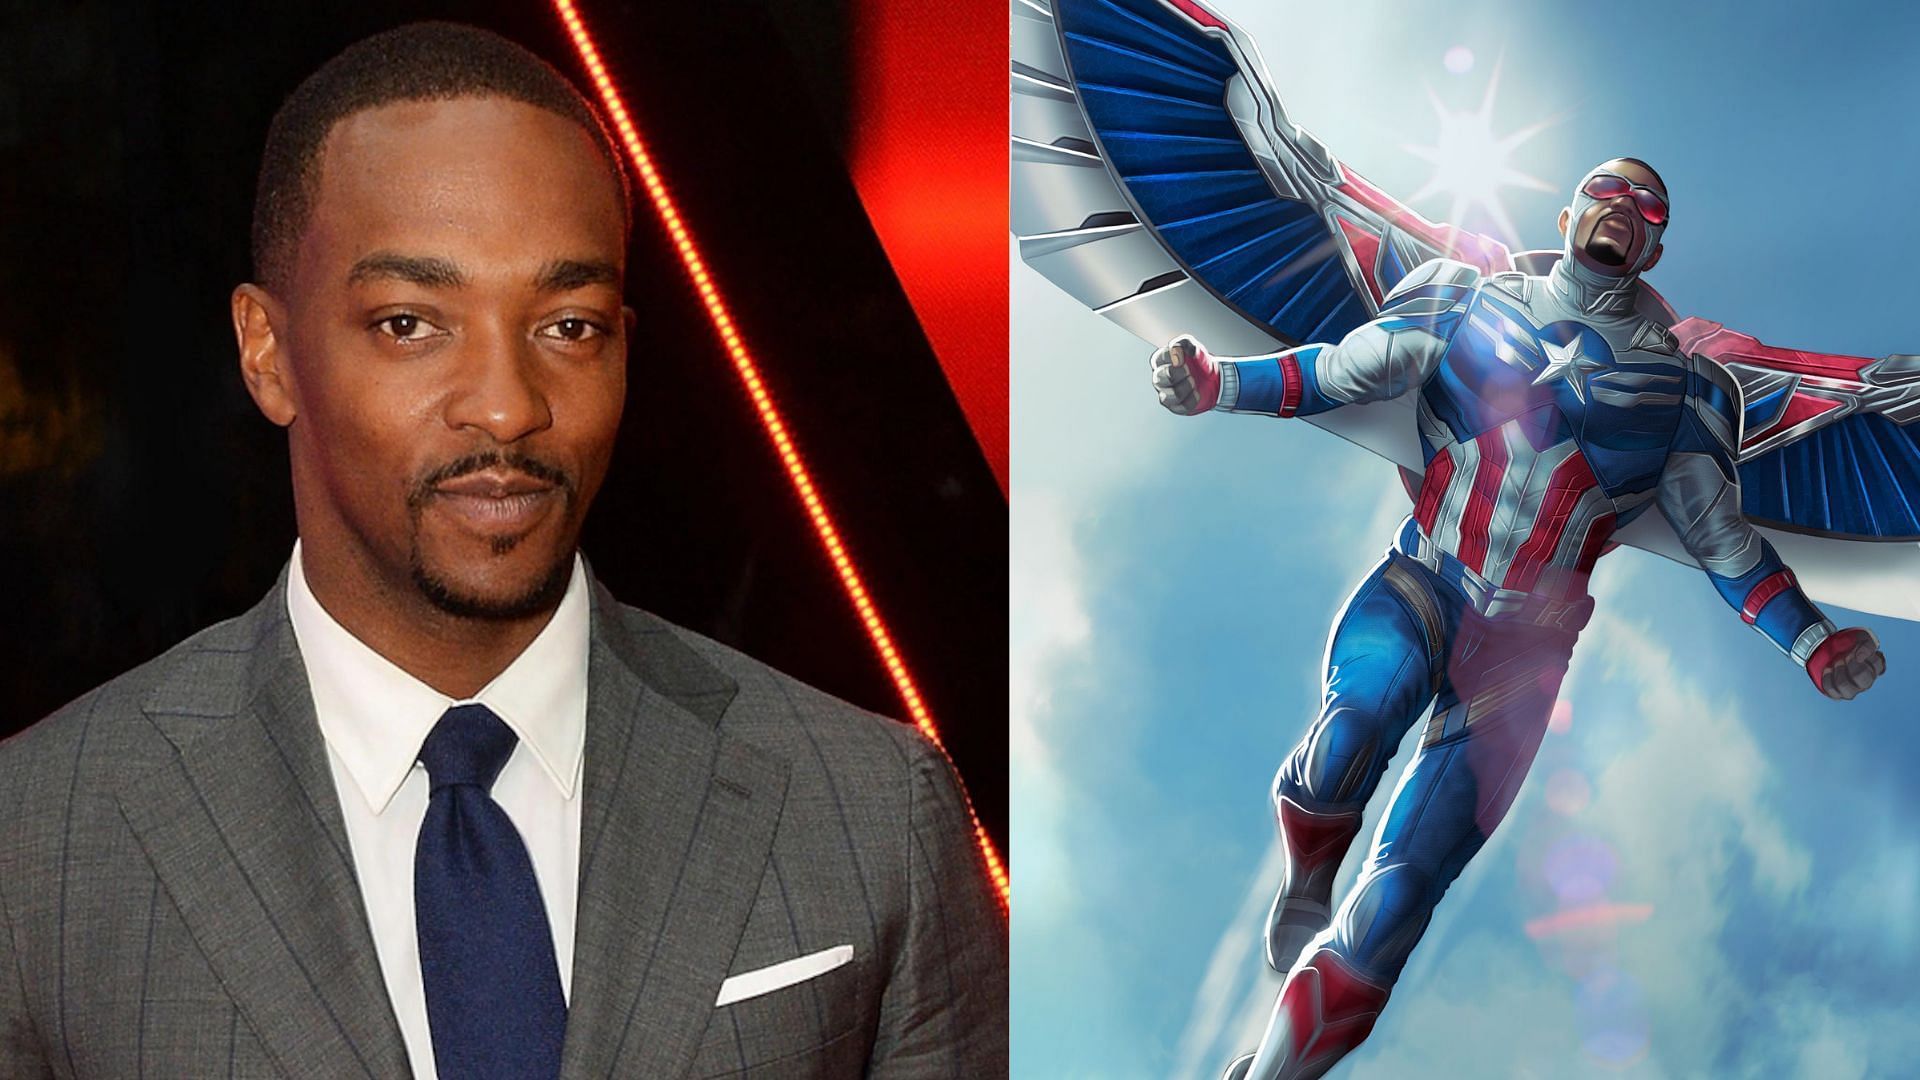 Anthony Mackie reveals that Sam Wilson will not be the leader of the Avengers (Images via Getty/Dgino@DeviantArt)